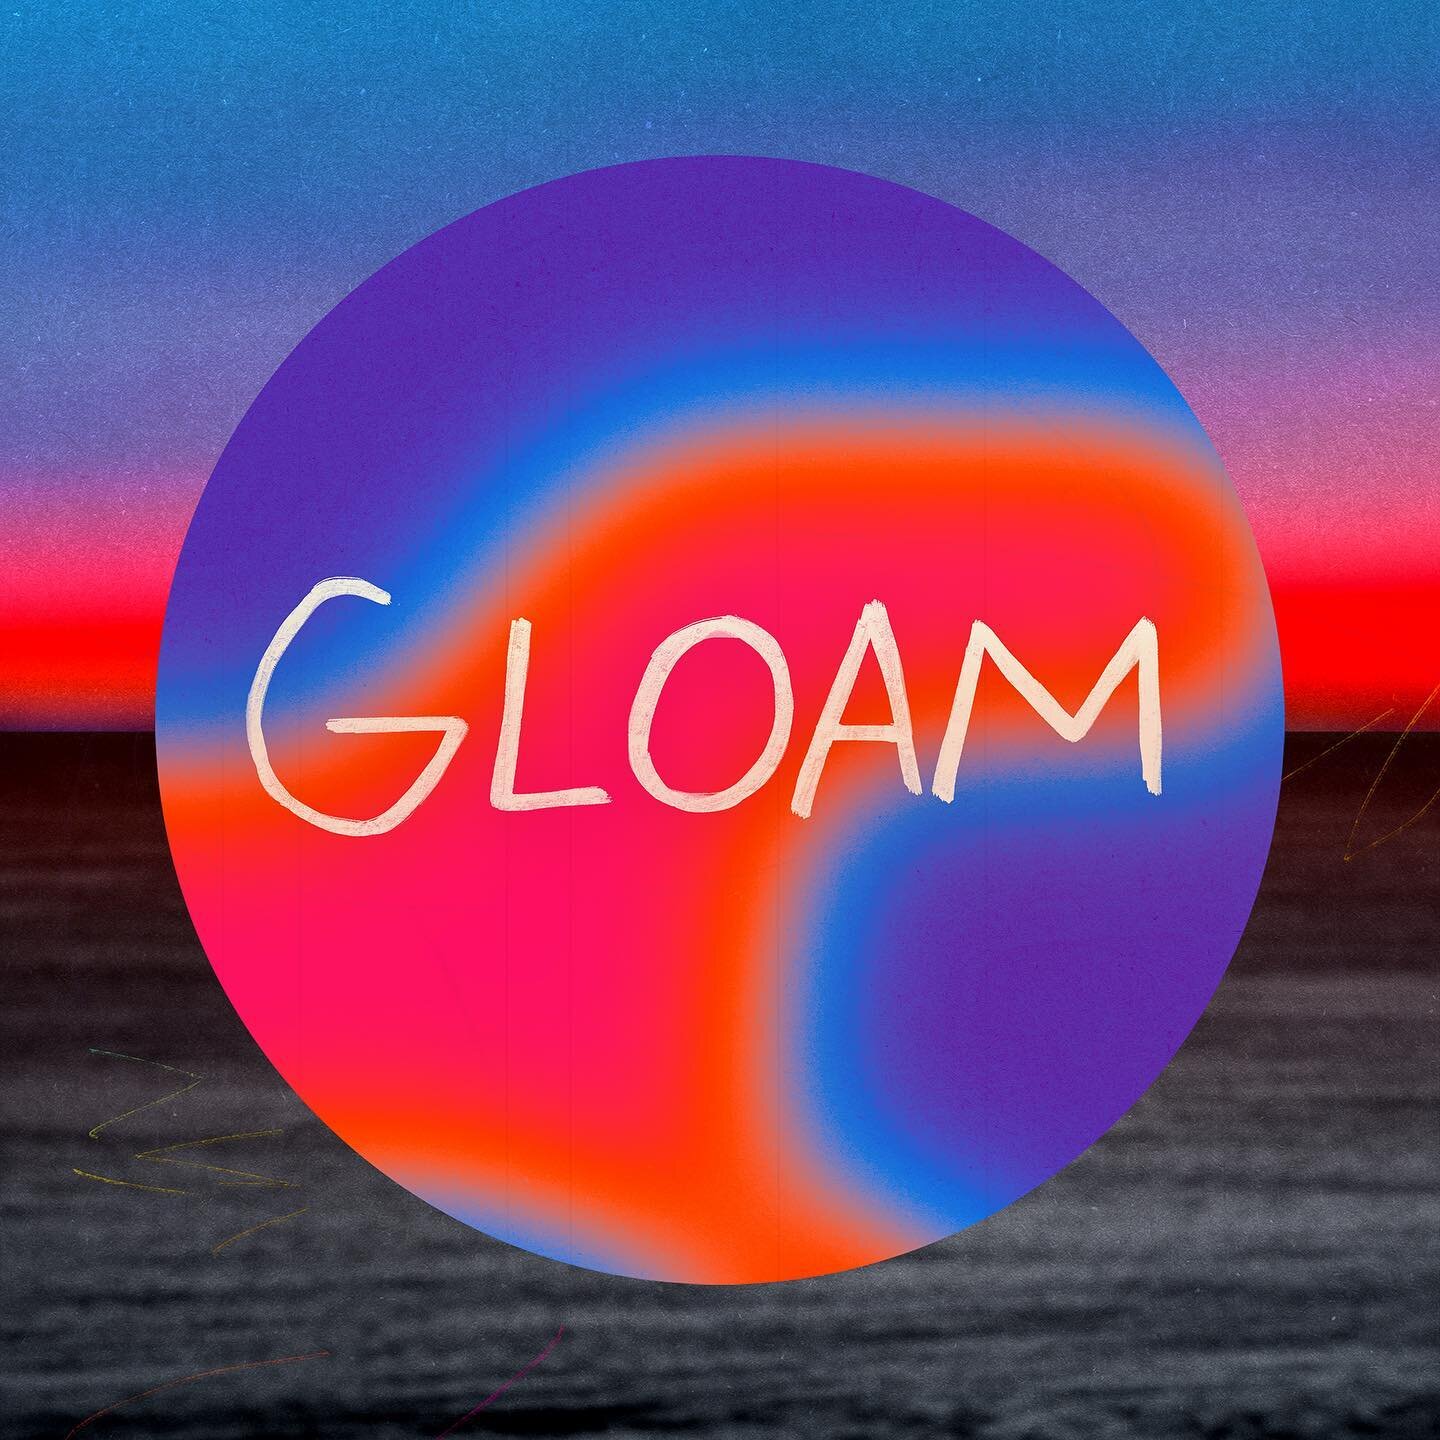 she&rsquo;s here 🥲 my debut album GLOAM is out everywhere now!!!!! 

10 songs that encapsulates the last 2 years of my life. i hope these songs live and grow with you the same way they have for me. thank you to everyone that helped shape this projec